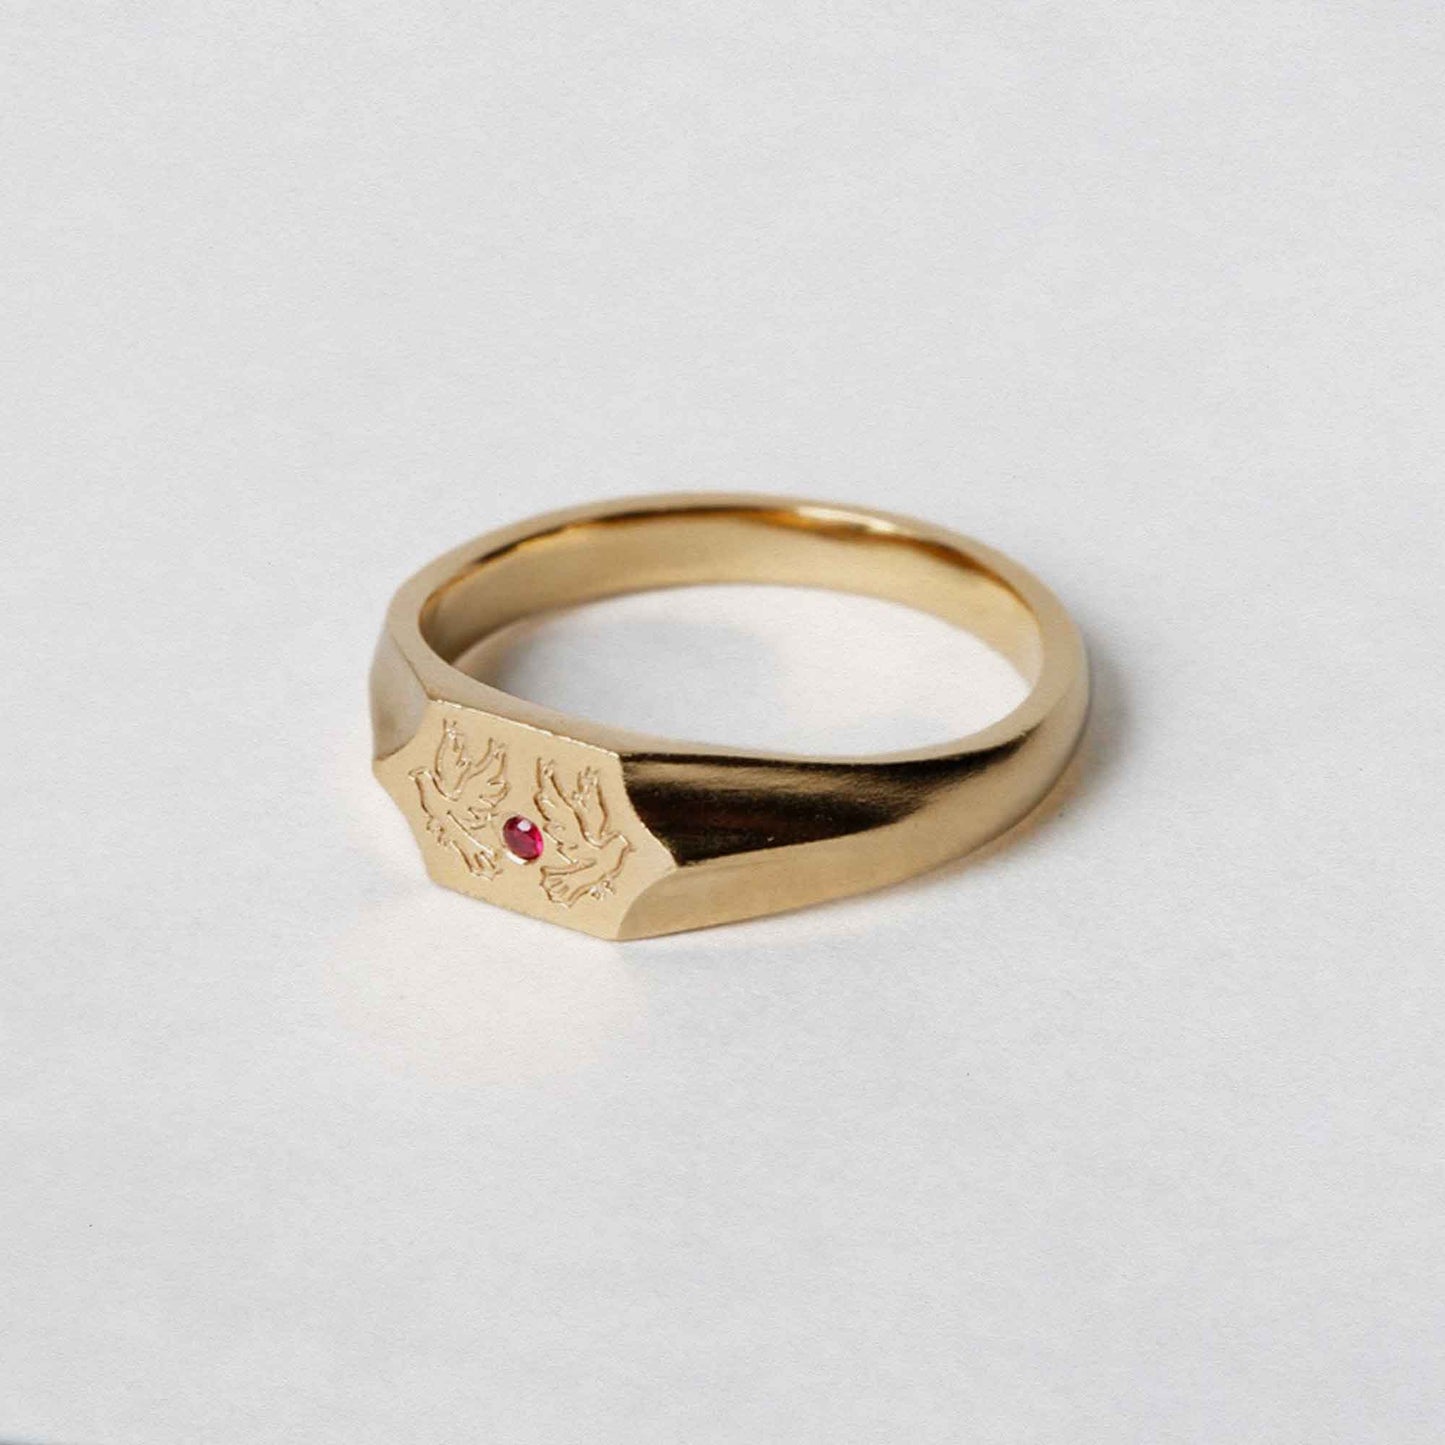 Two birds and a ruby stone on a 9CT gold signet ring